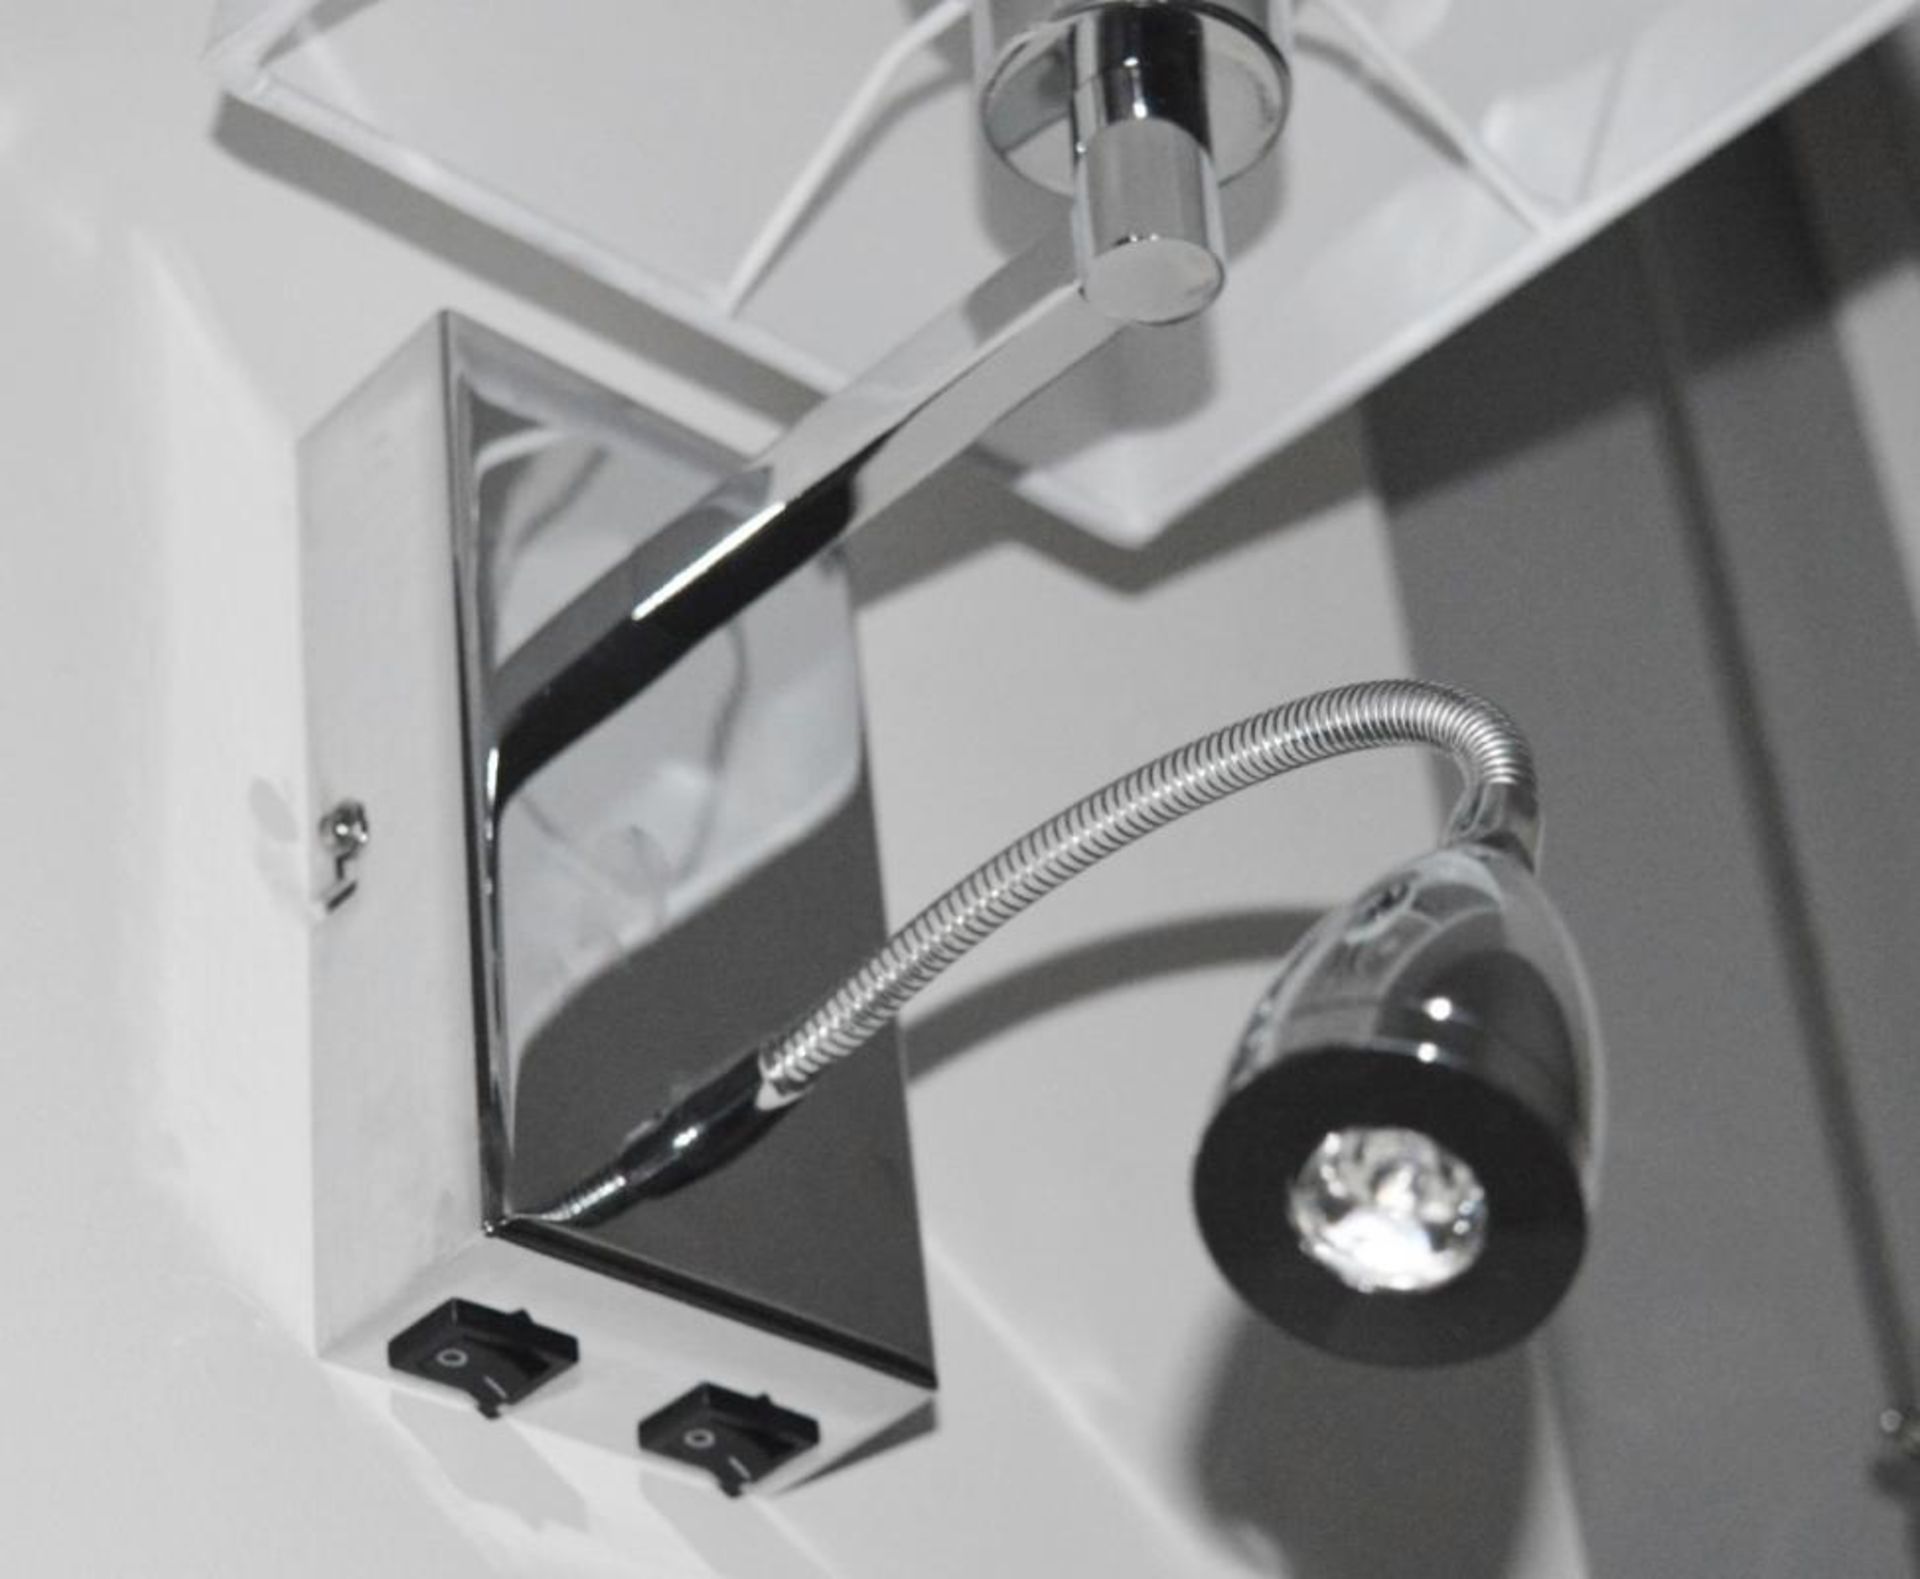 1 x Chrome Wall Light With White Shade Incorporating Led Flexi-arm - Ex Display Stock - CL298 - Ref: - Image 3 of 3